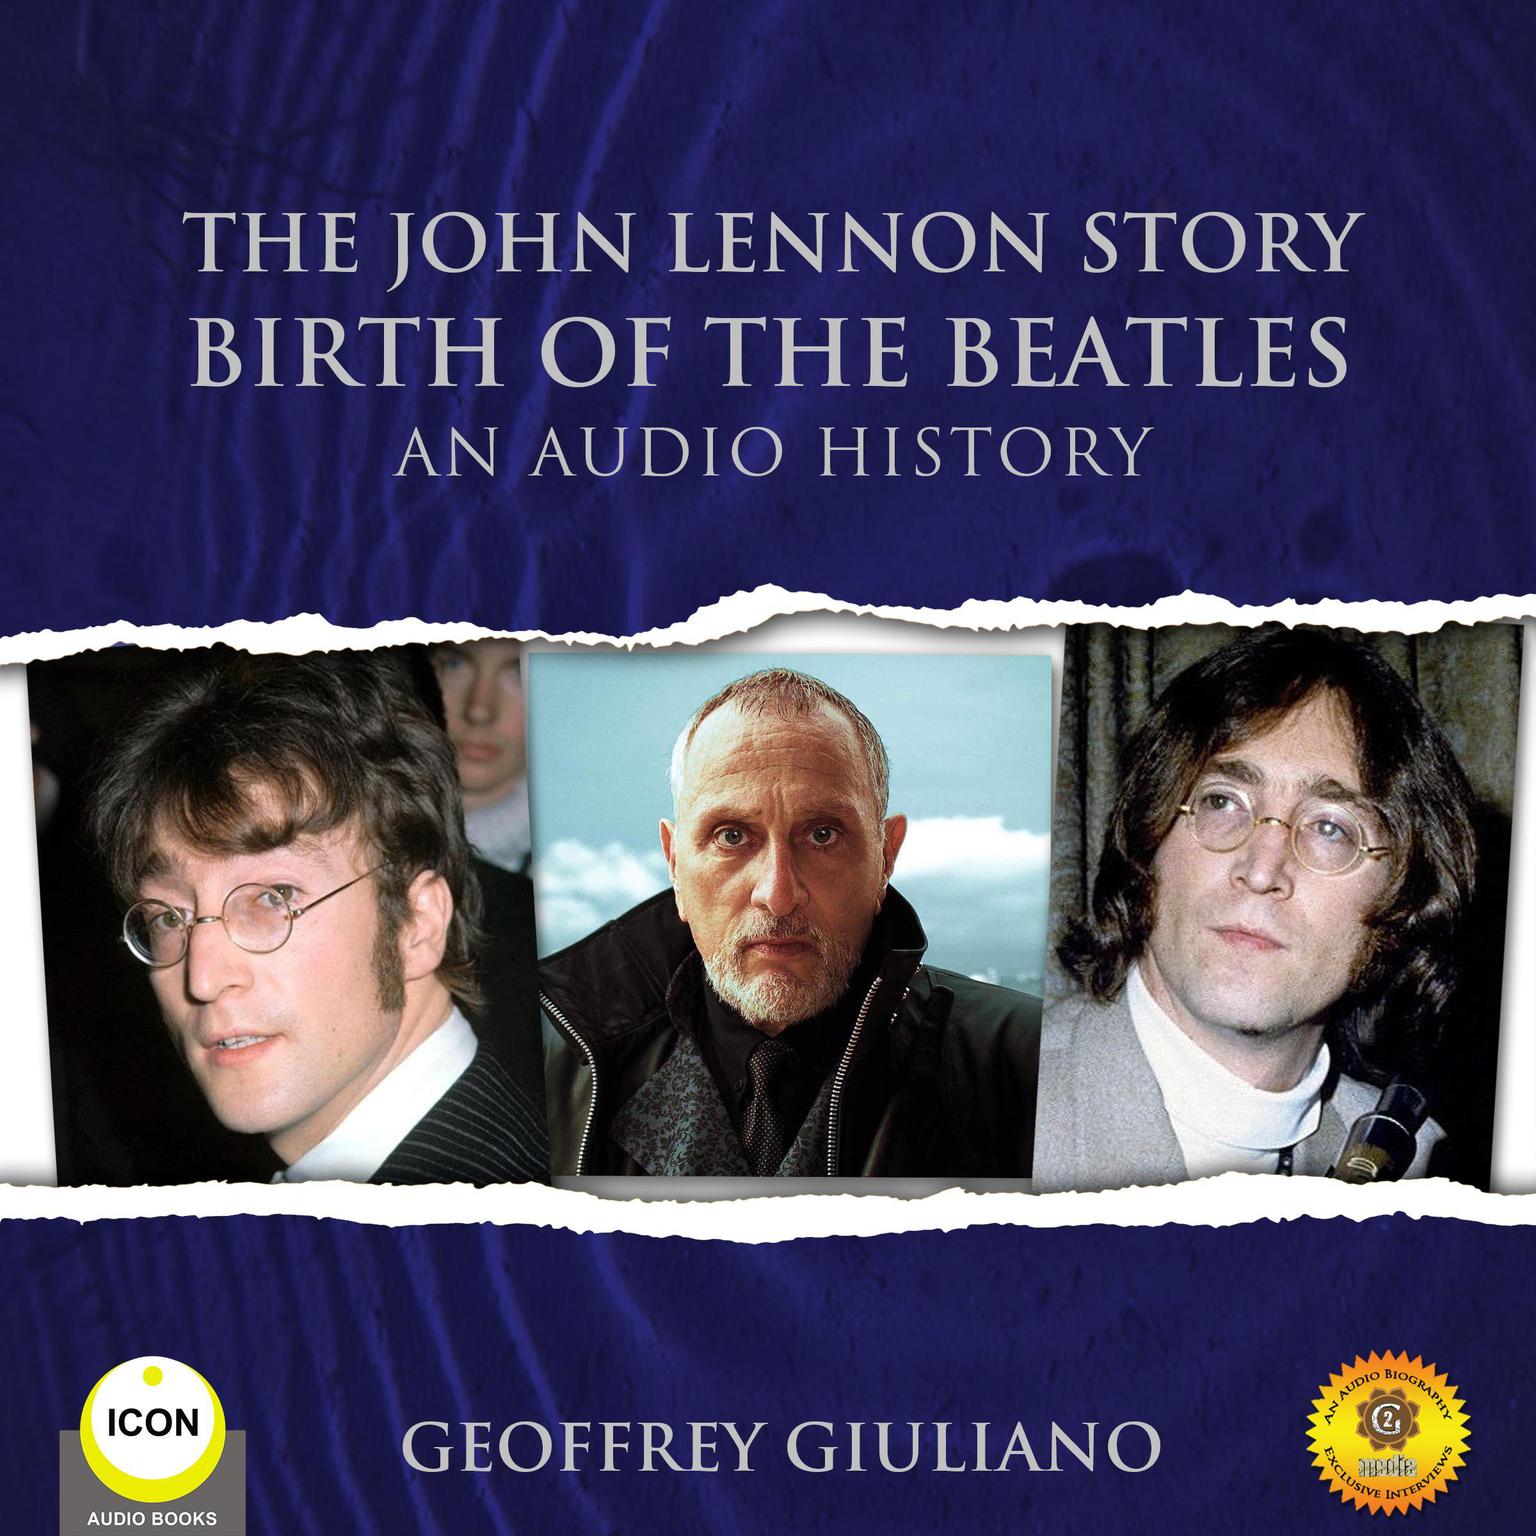 The John Lennon Story Birth of the Beatles - An Audio History Audiobook, by Geoffrey Giuliano